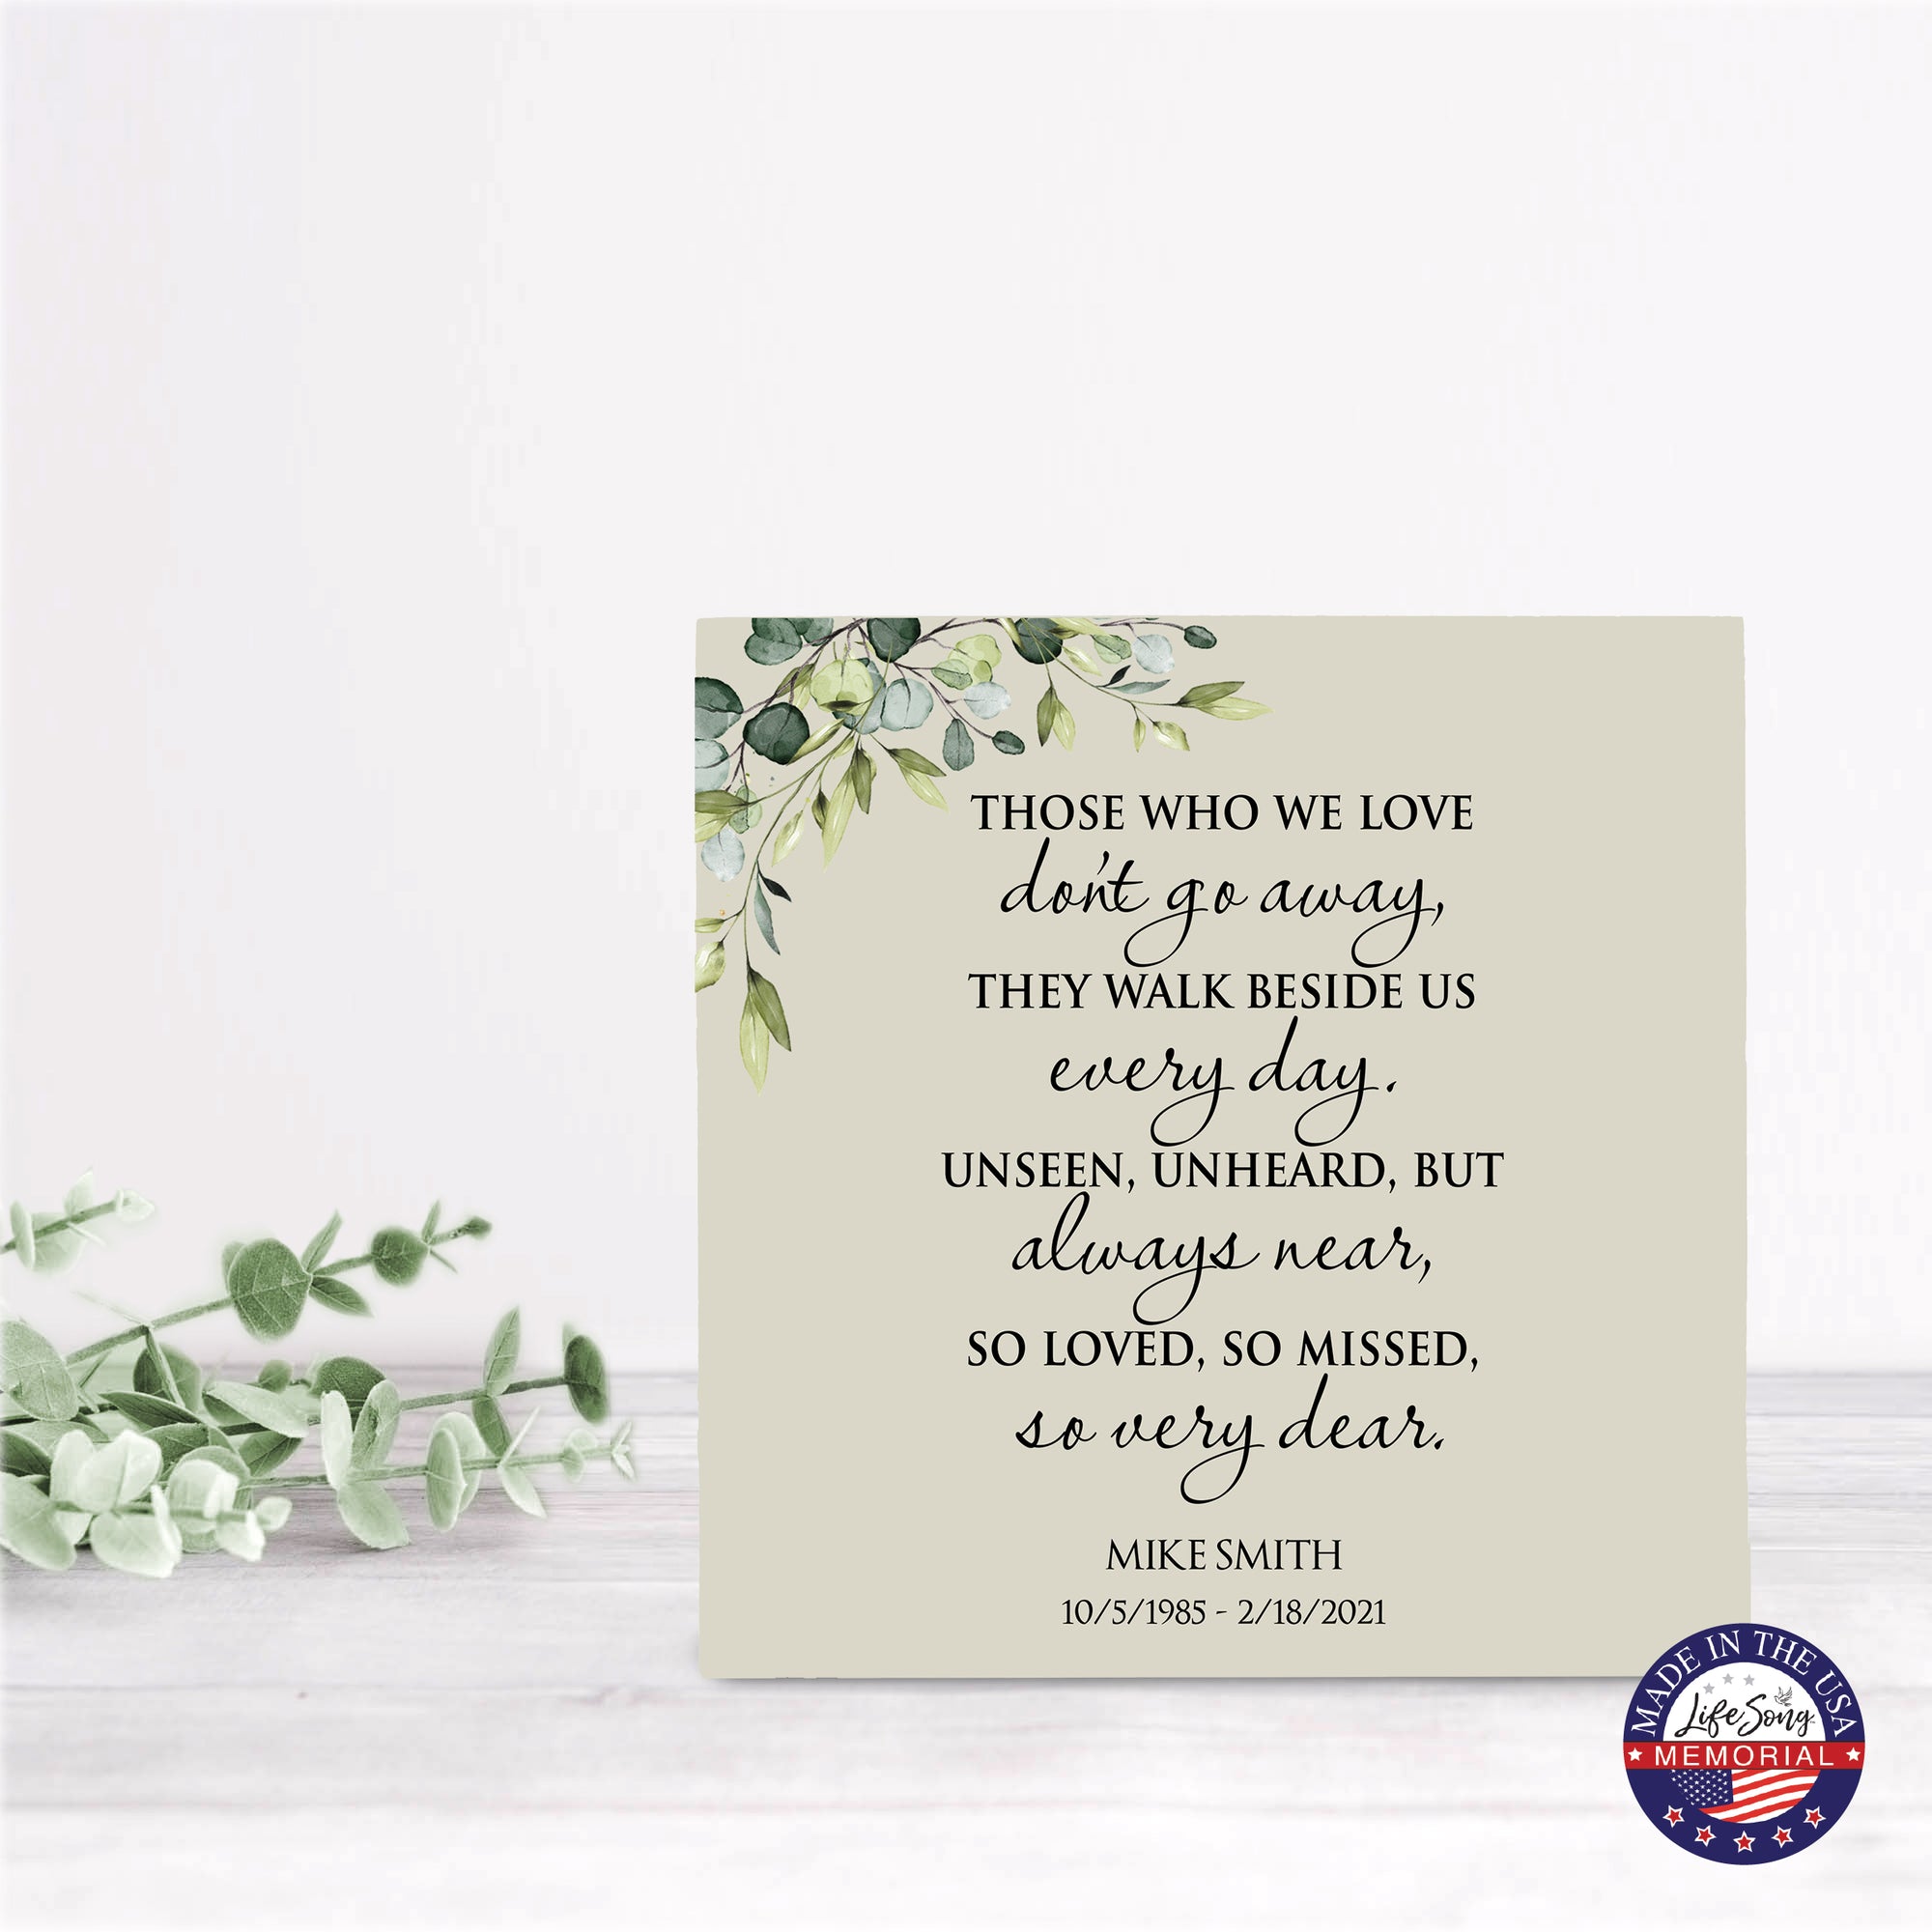 Timeless Human Memorial Shadow Box Urn With Inspirational Verse in Ivory - Those Who We Love